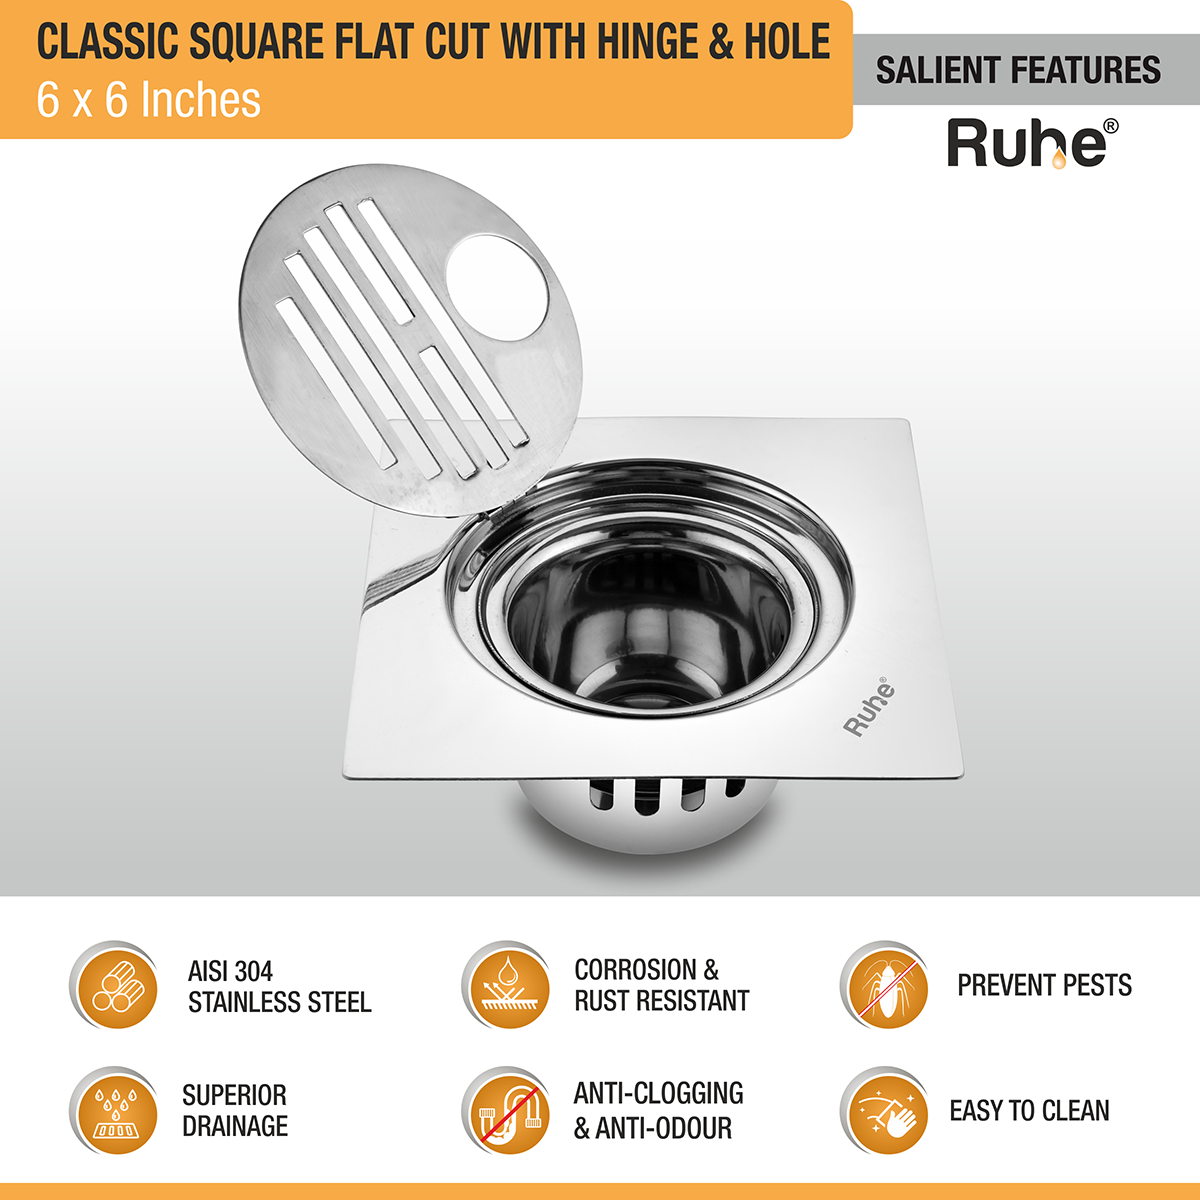 Classic Square Flat Cut Floor Drain (6 x 6 Inches) with Hinge, Hole and Cockroach Trap (304 Grade) features